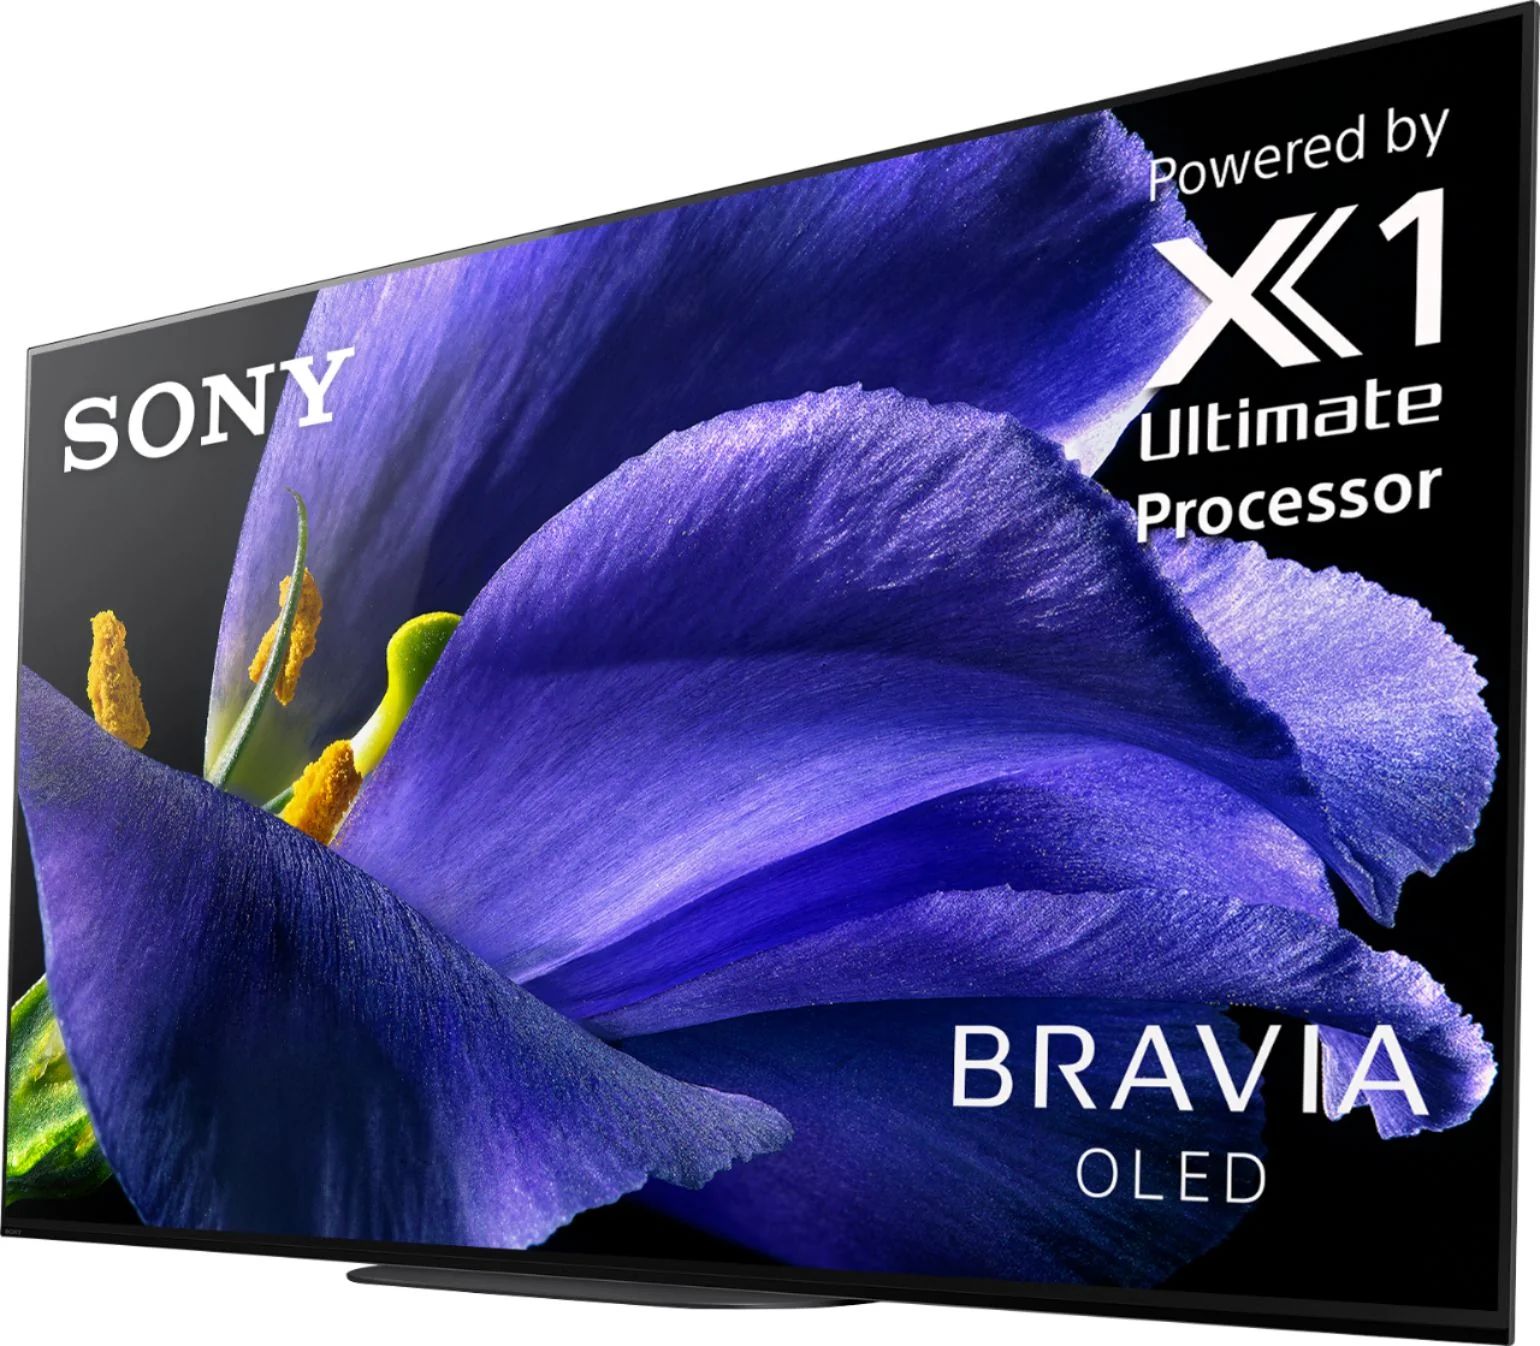 How Many Nits Does Sony Master A9G 77 Class Hdr 4K UHD Smart OLED TV Have